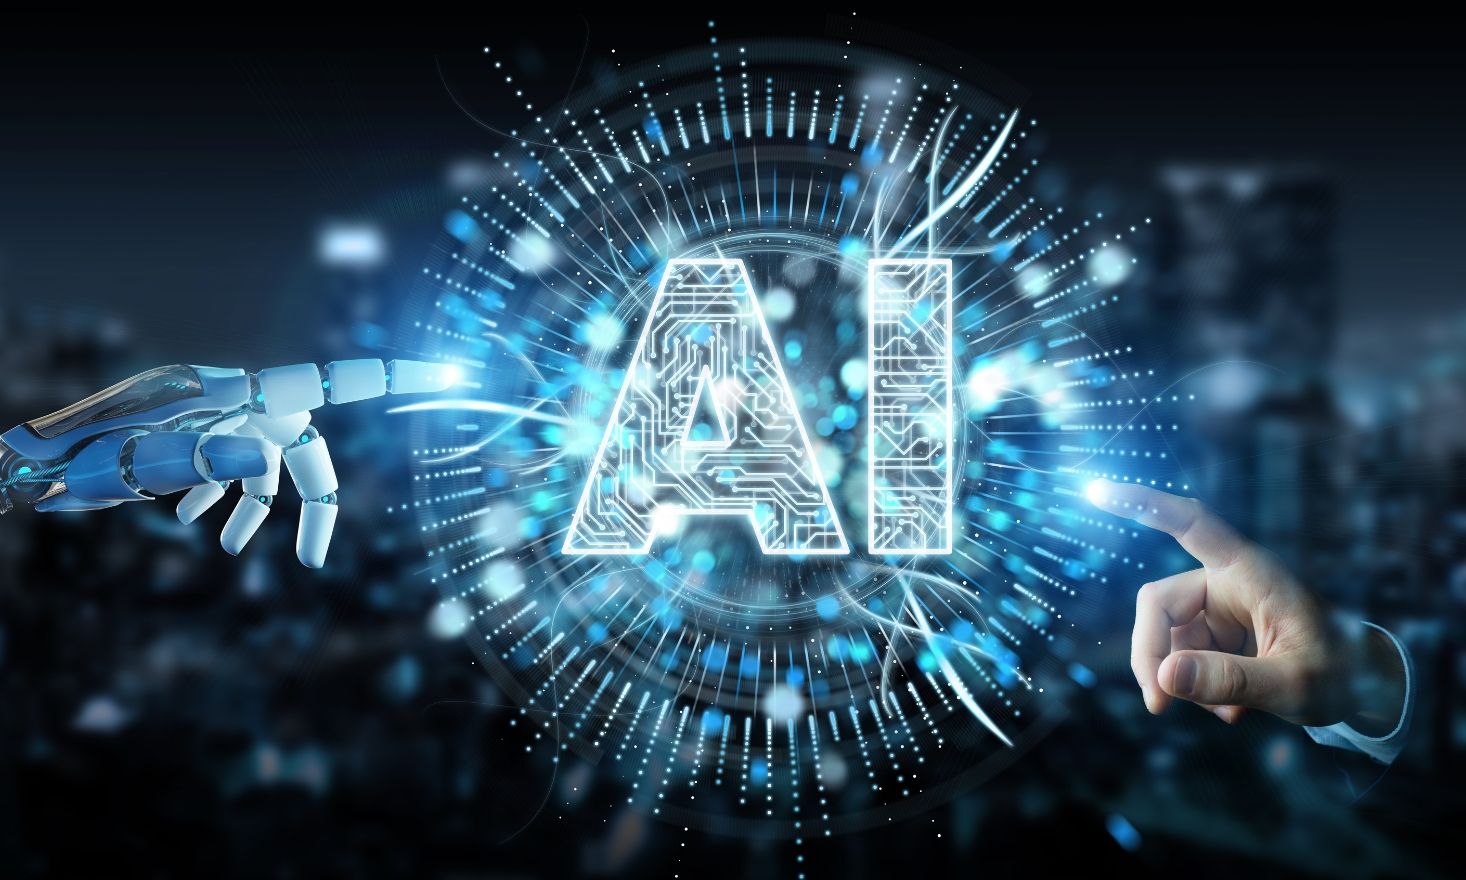 Digital image of "AI" in center with a robotic arm and human arm pointing at words